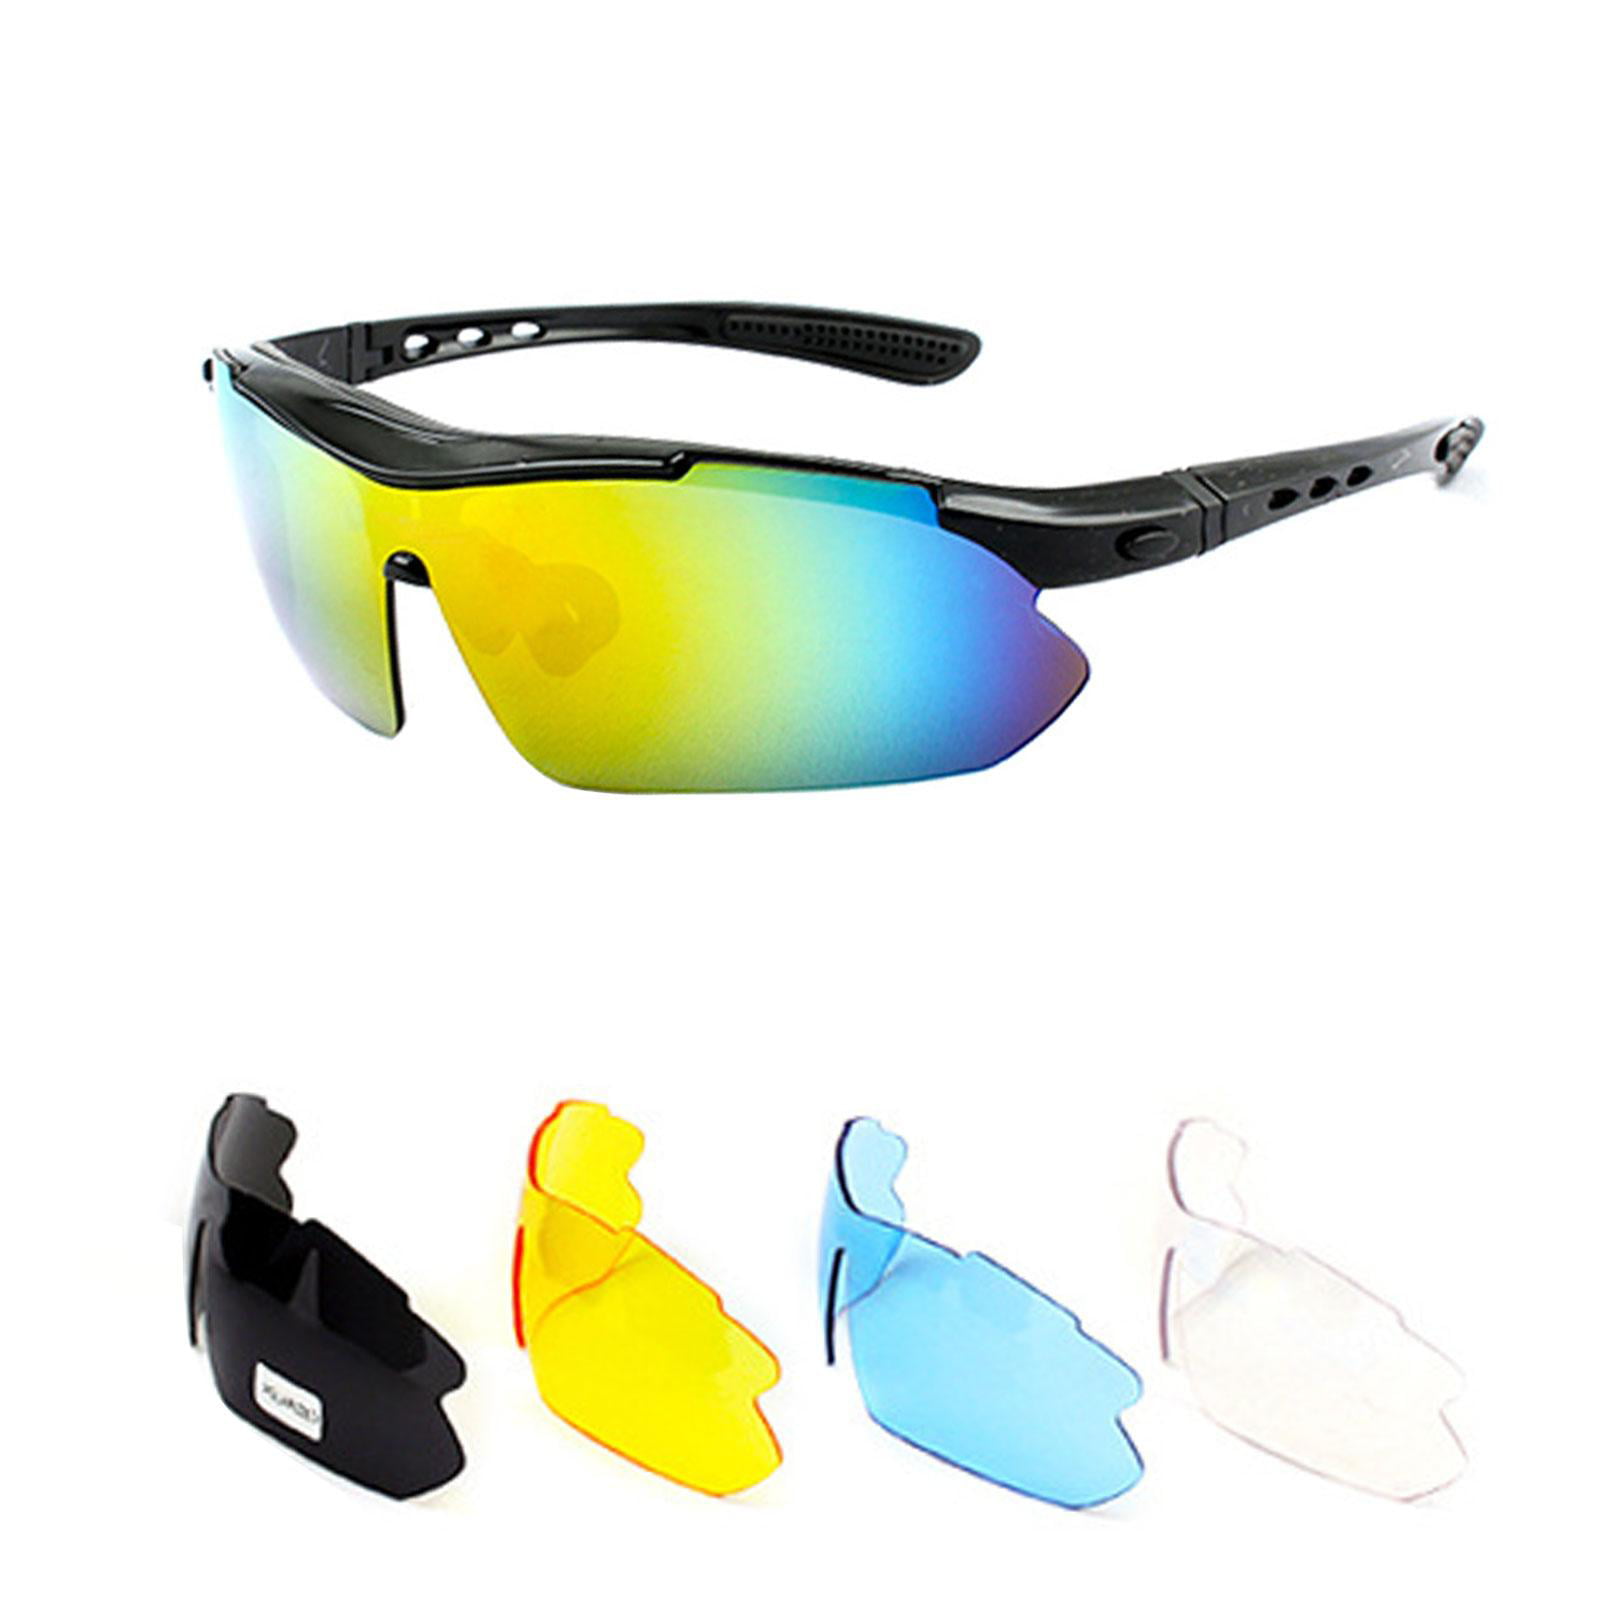 Details about   Polarized Cycling Glasses UV400 Bike Sunglasses Bicycle Eyewear Sports Goggles 